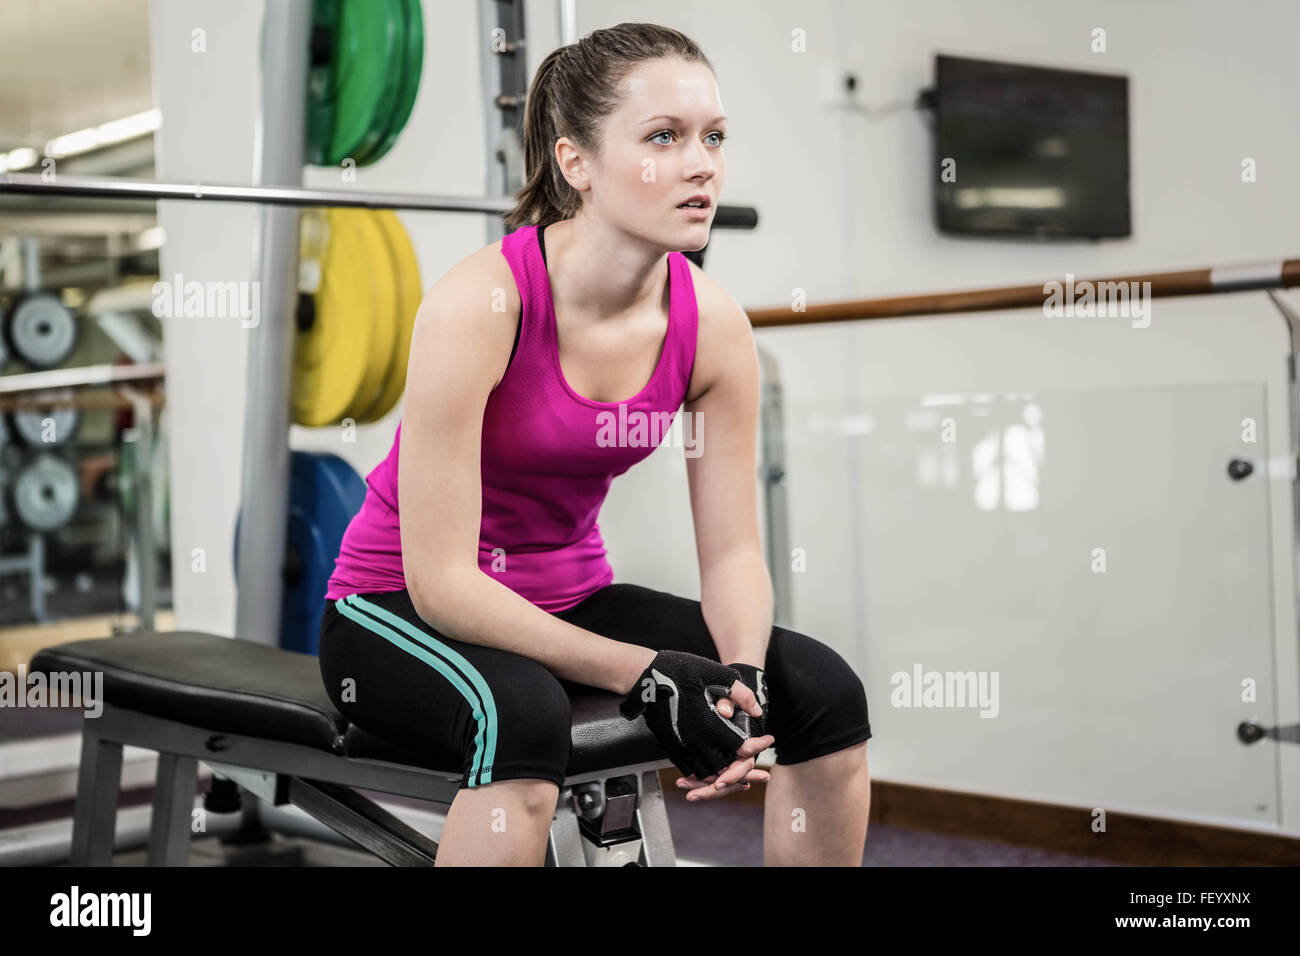 Tired woman sitting on barbell bench Banque D'Images